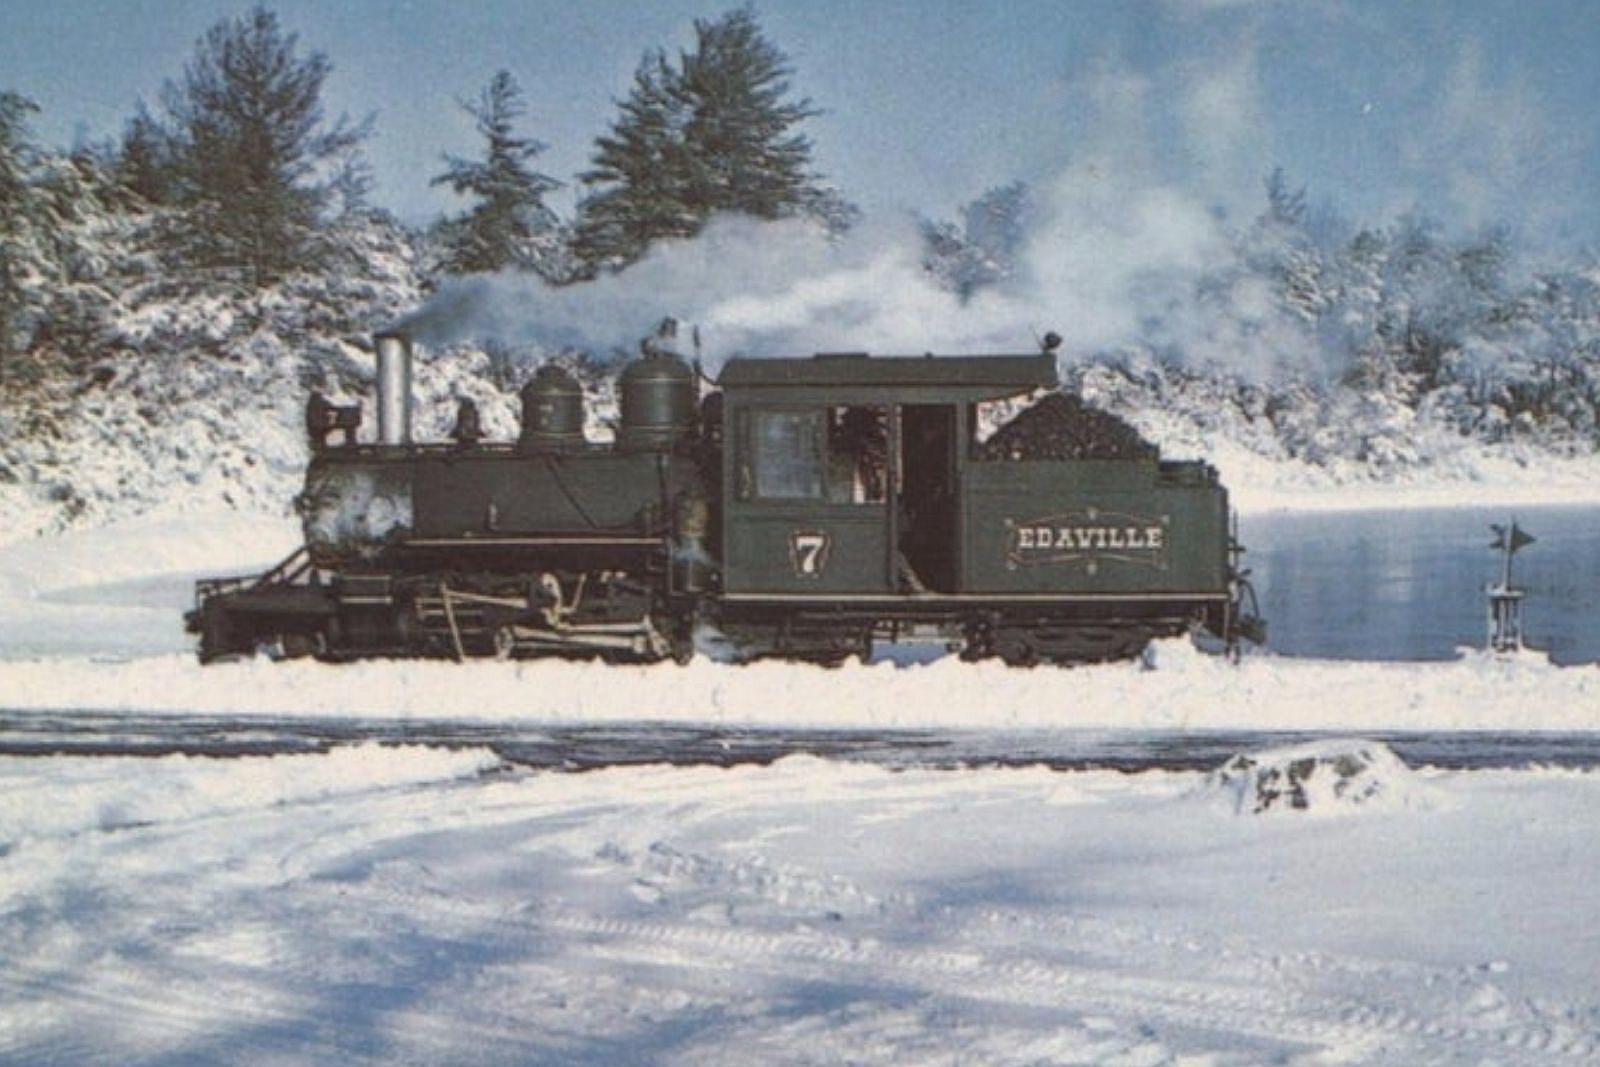 From Carver to Portland: Edaville's Original Trains Now Up North